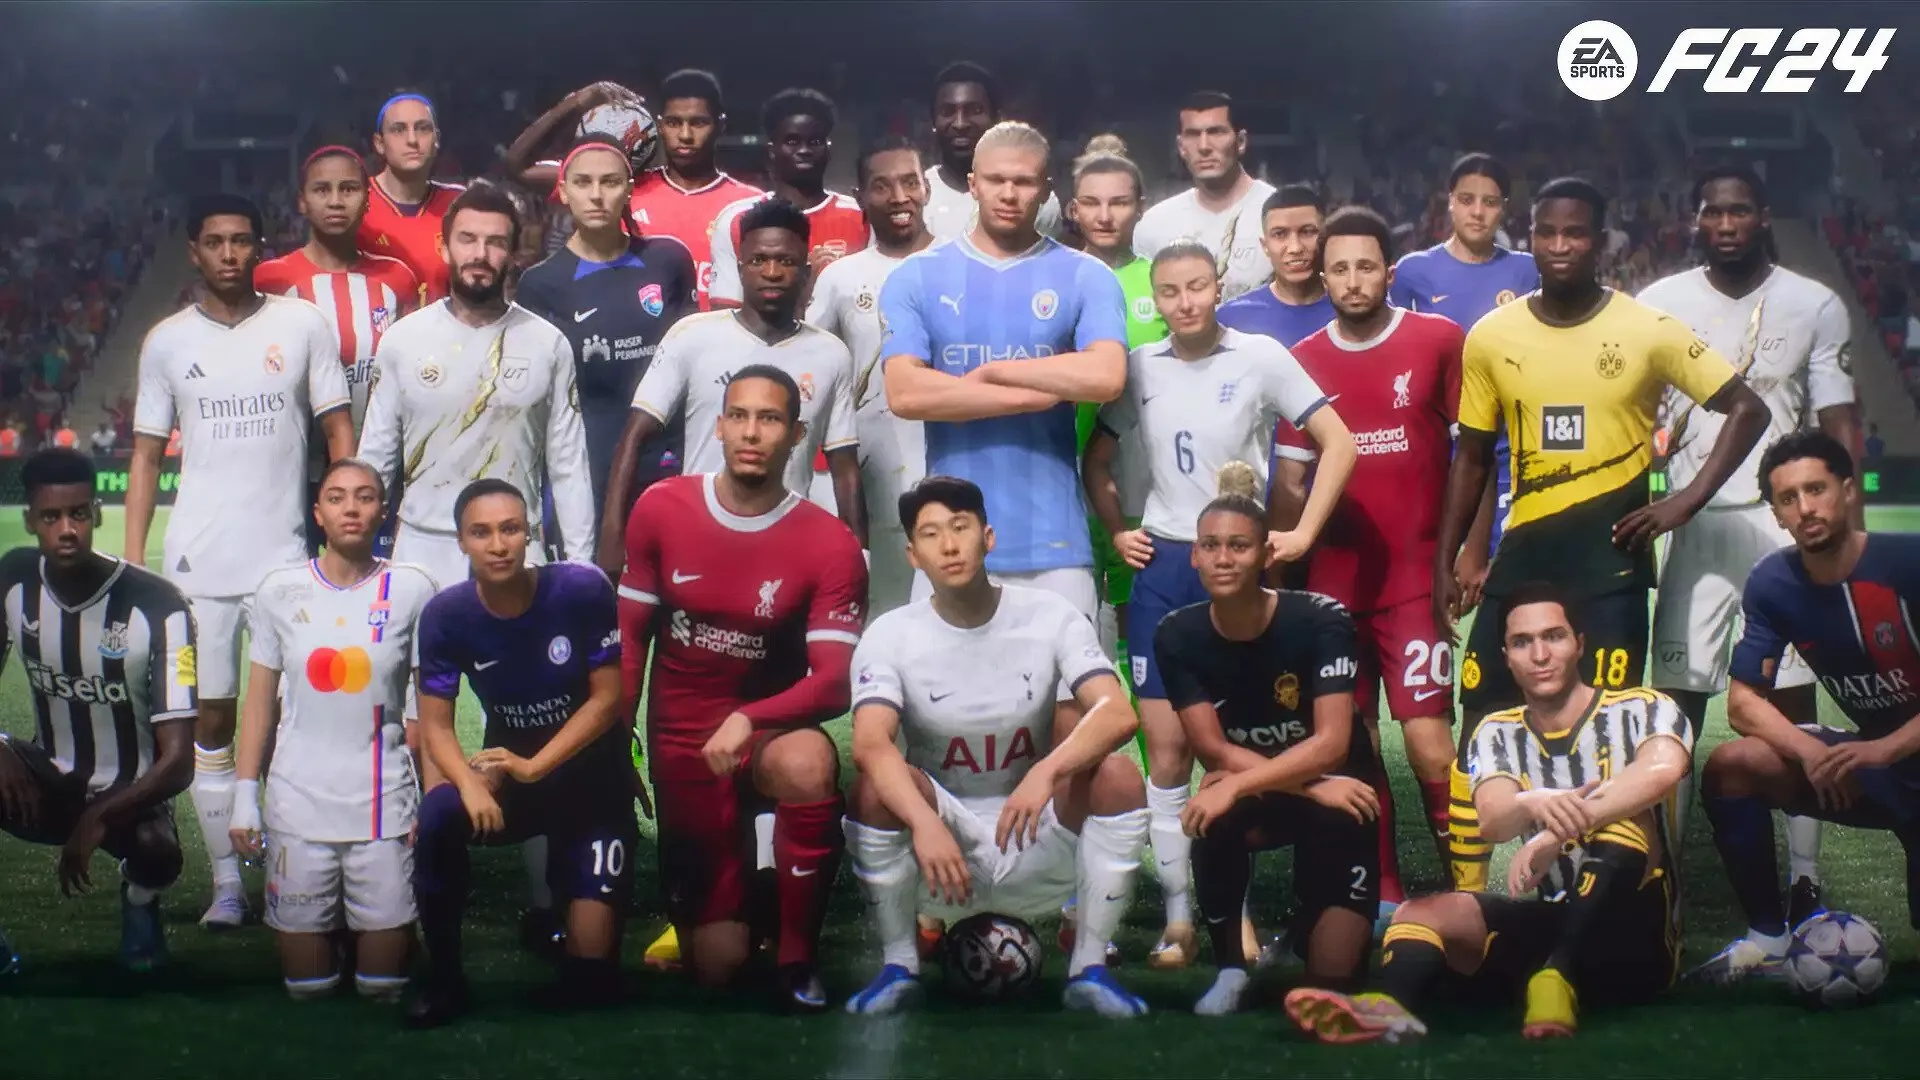 Hero and icon card designs revealed for EA Sports FC 24 Latest News